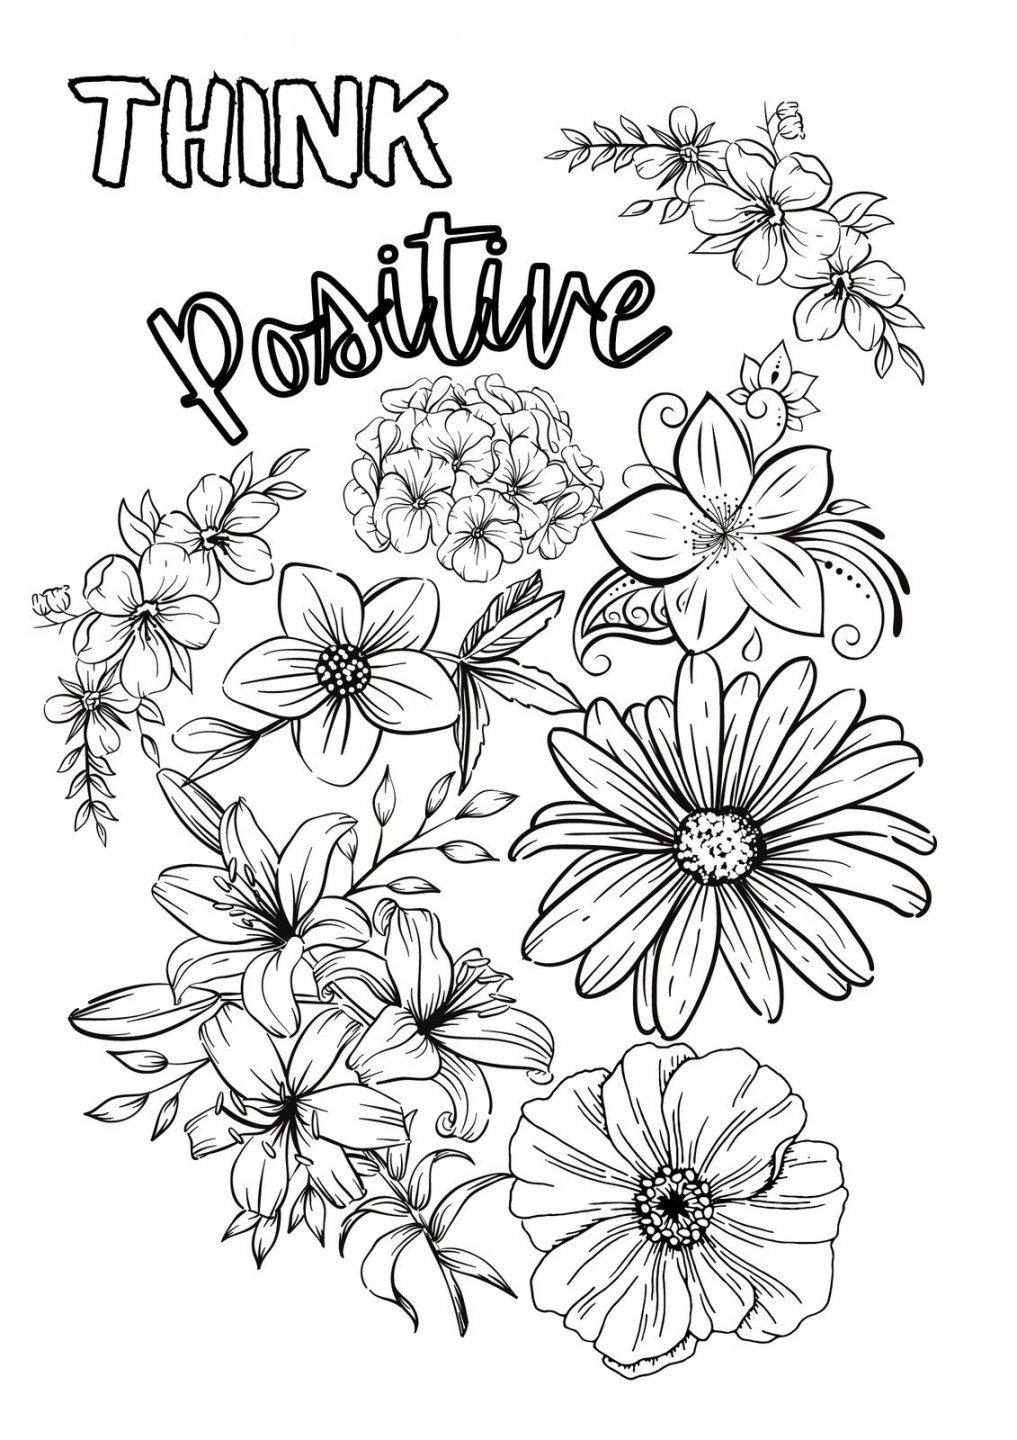 Free Printable Pages For Coloring - Printable - Free printable coloring page templates to customize  Canva